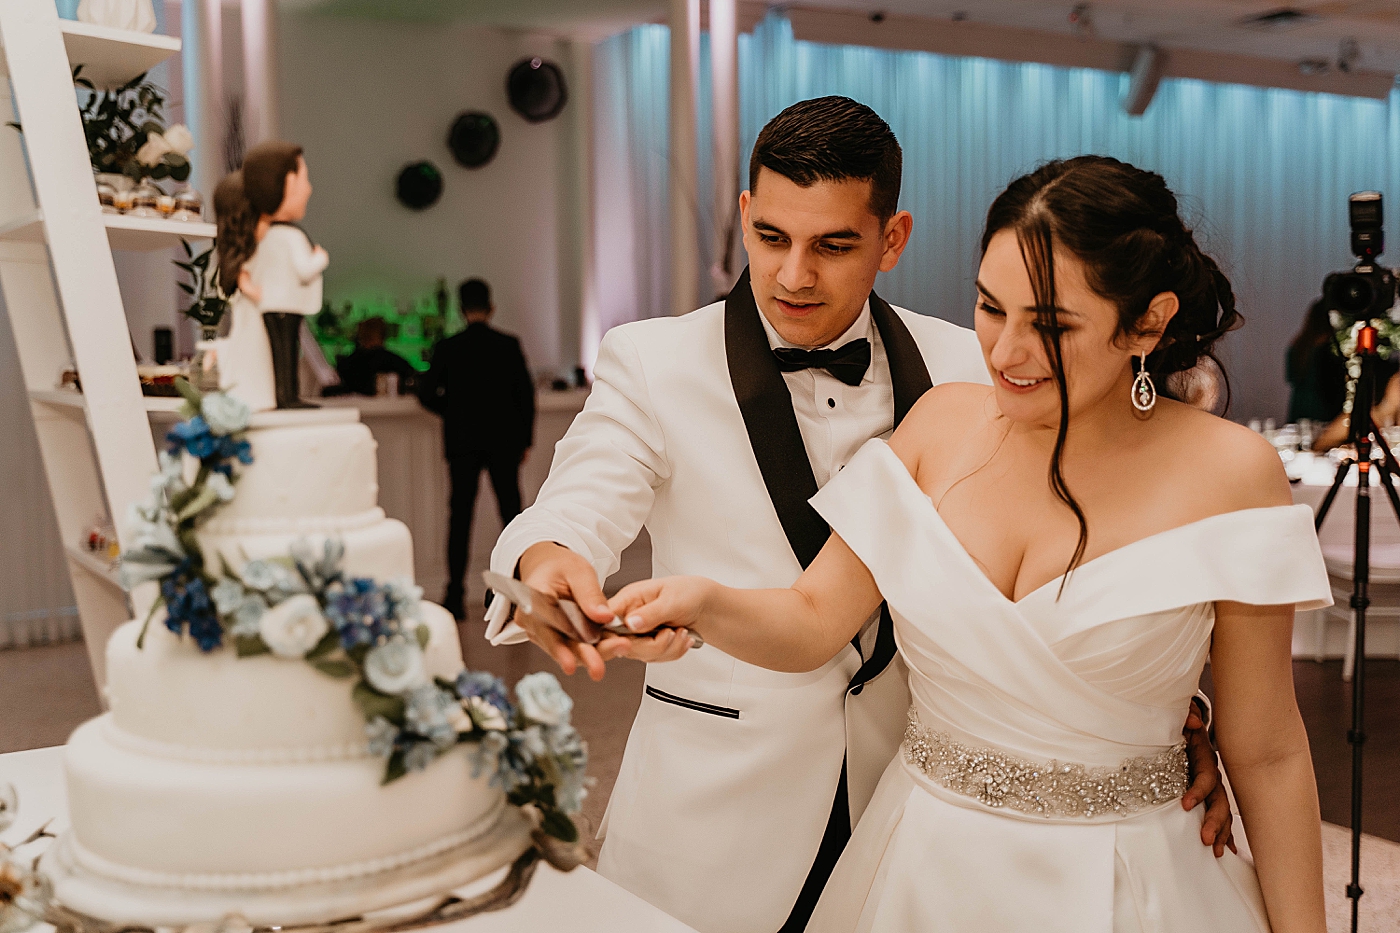 Bride and Groom cutting cake Lavan Venue Wedding Photography captured by South Florida Wedding Photographer Krystal Capone Photography